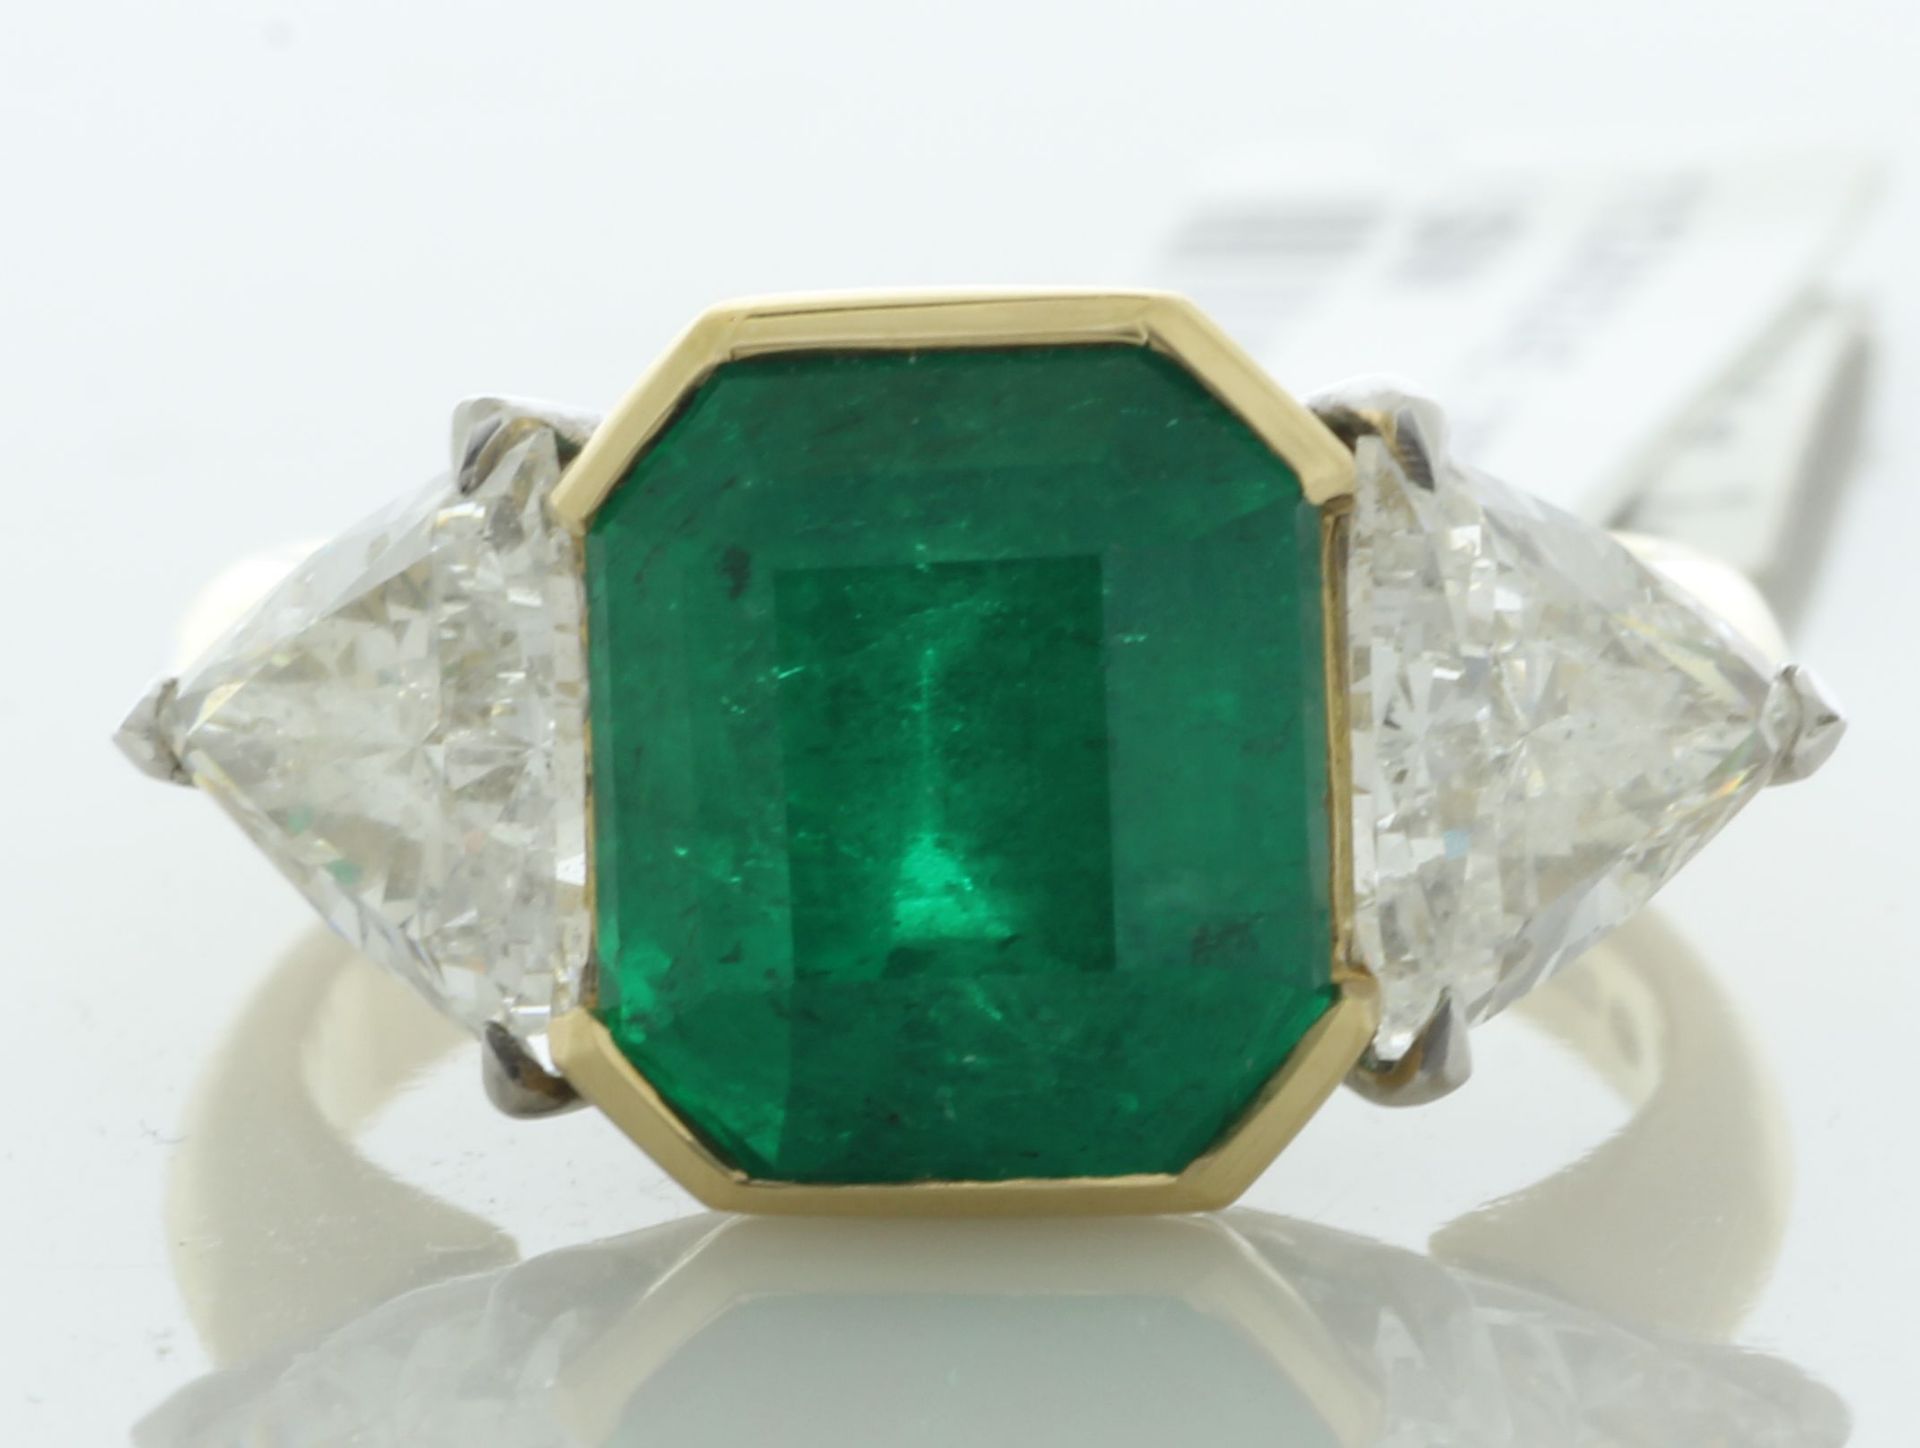 18ct Yellow Gold Three Stone Diamond And Emerald Ring (E4.27) 2.04 Carats - Valued By IDI £282,435.